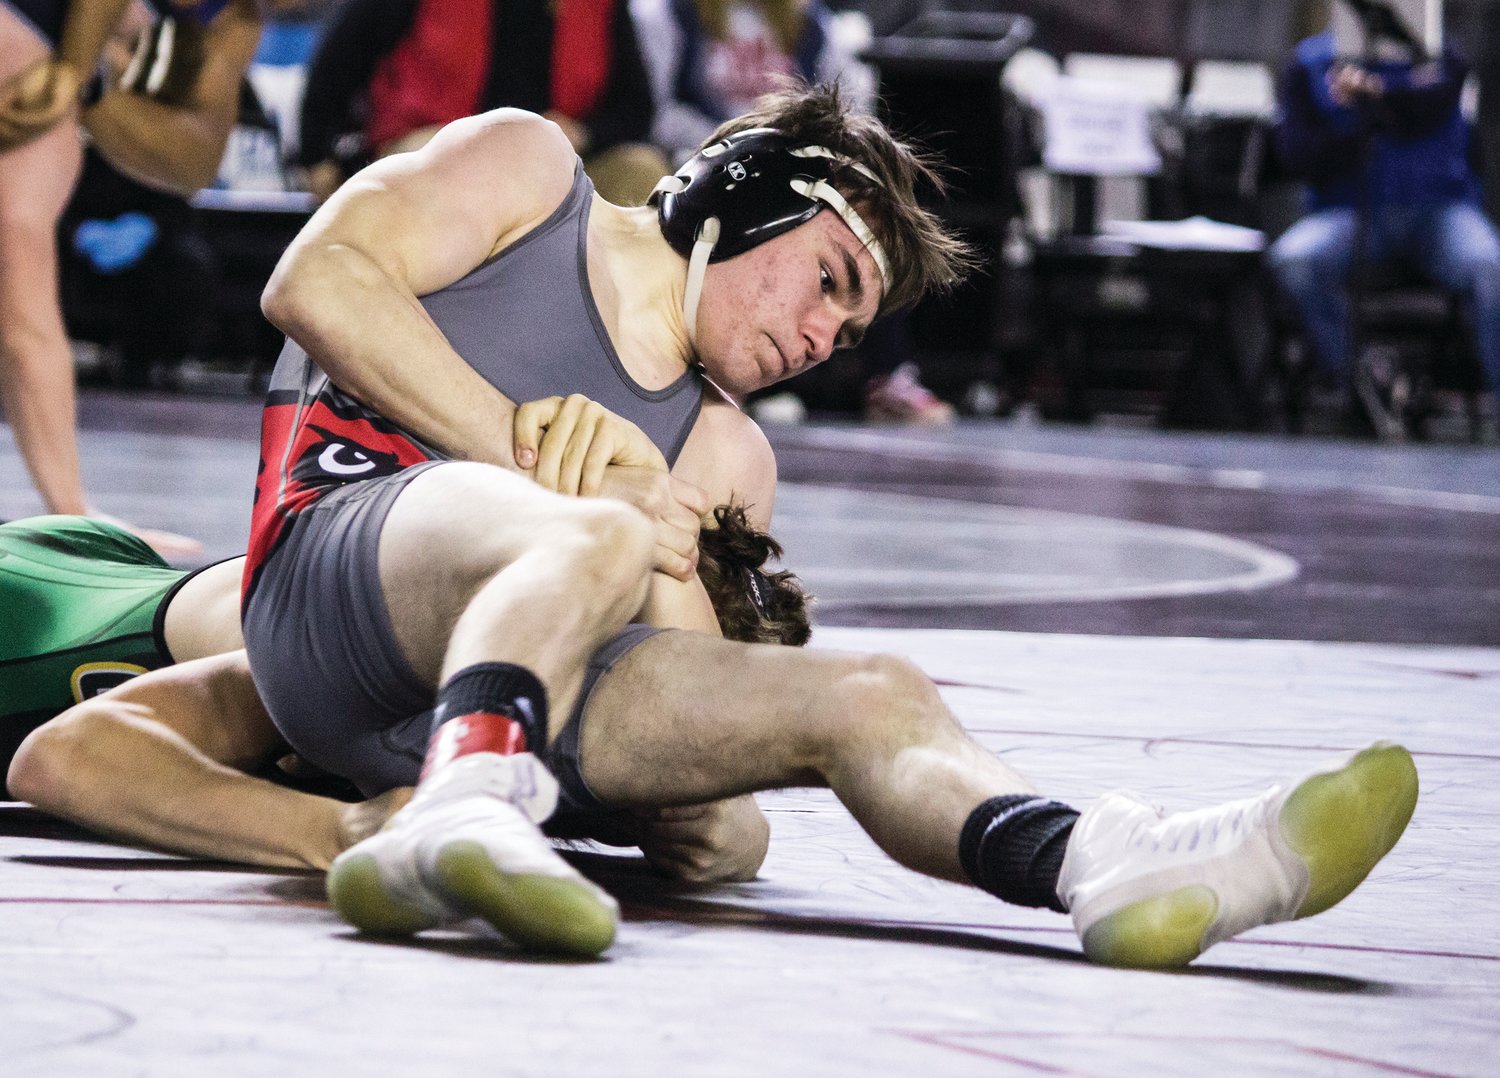 Winlock's Dusty Thayer, on top, wrestles an oppponent in the 1B/2B 126-pound bracket of the WIAA Mat Classic boys state wrestling tournament on Friday.